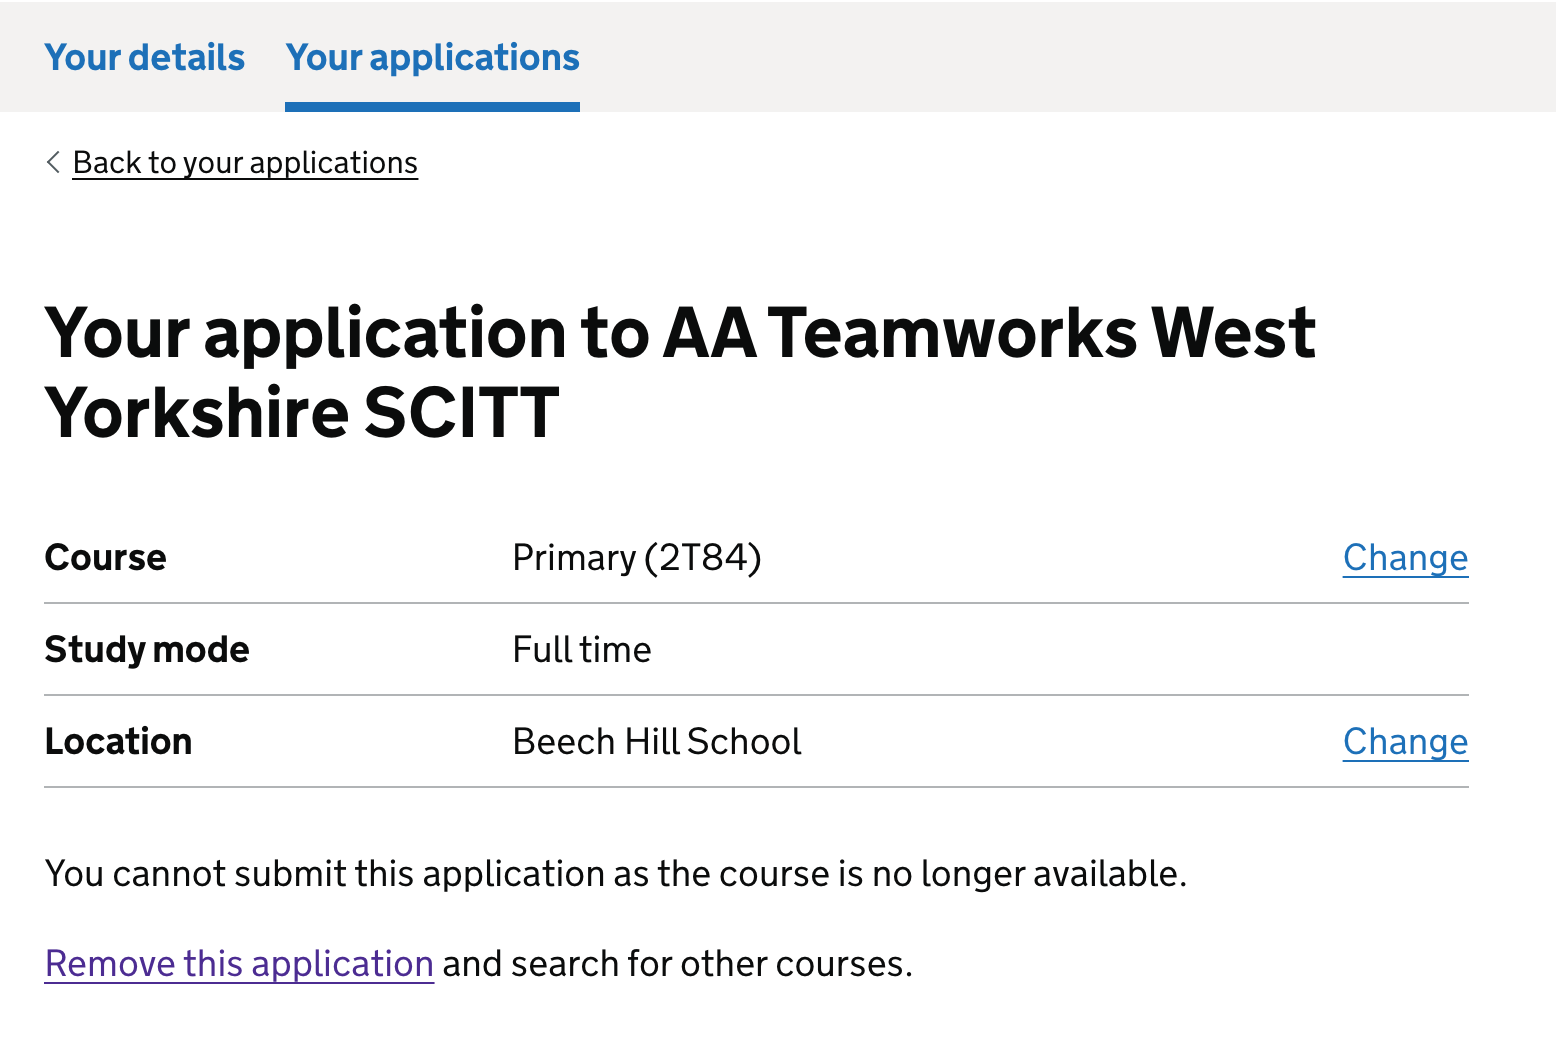 Screenshot of the summary of the provider and course a candidate is applying to in a summary list. Below this is content telling the candidate they cannot submit their application because the course is not available anymore and they need to remove the application.